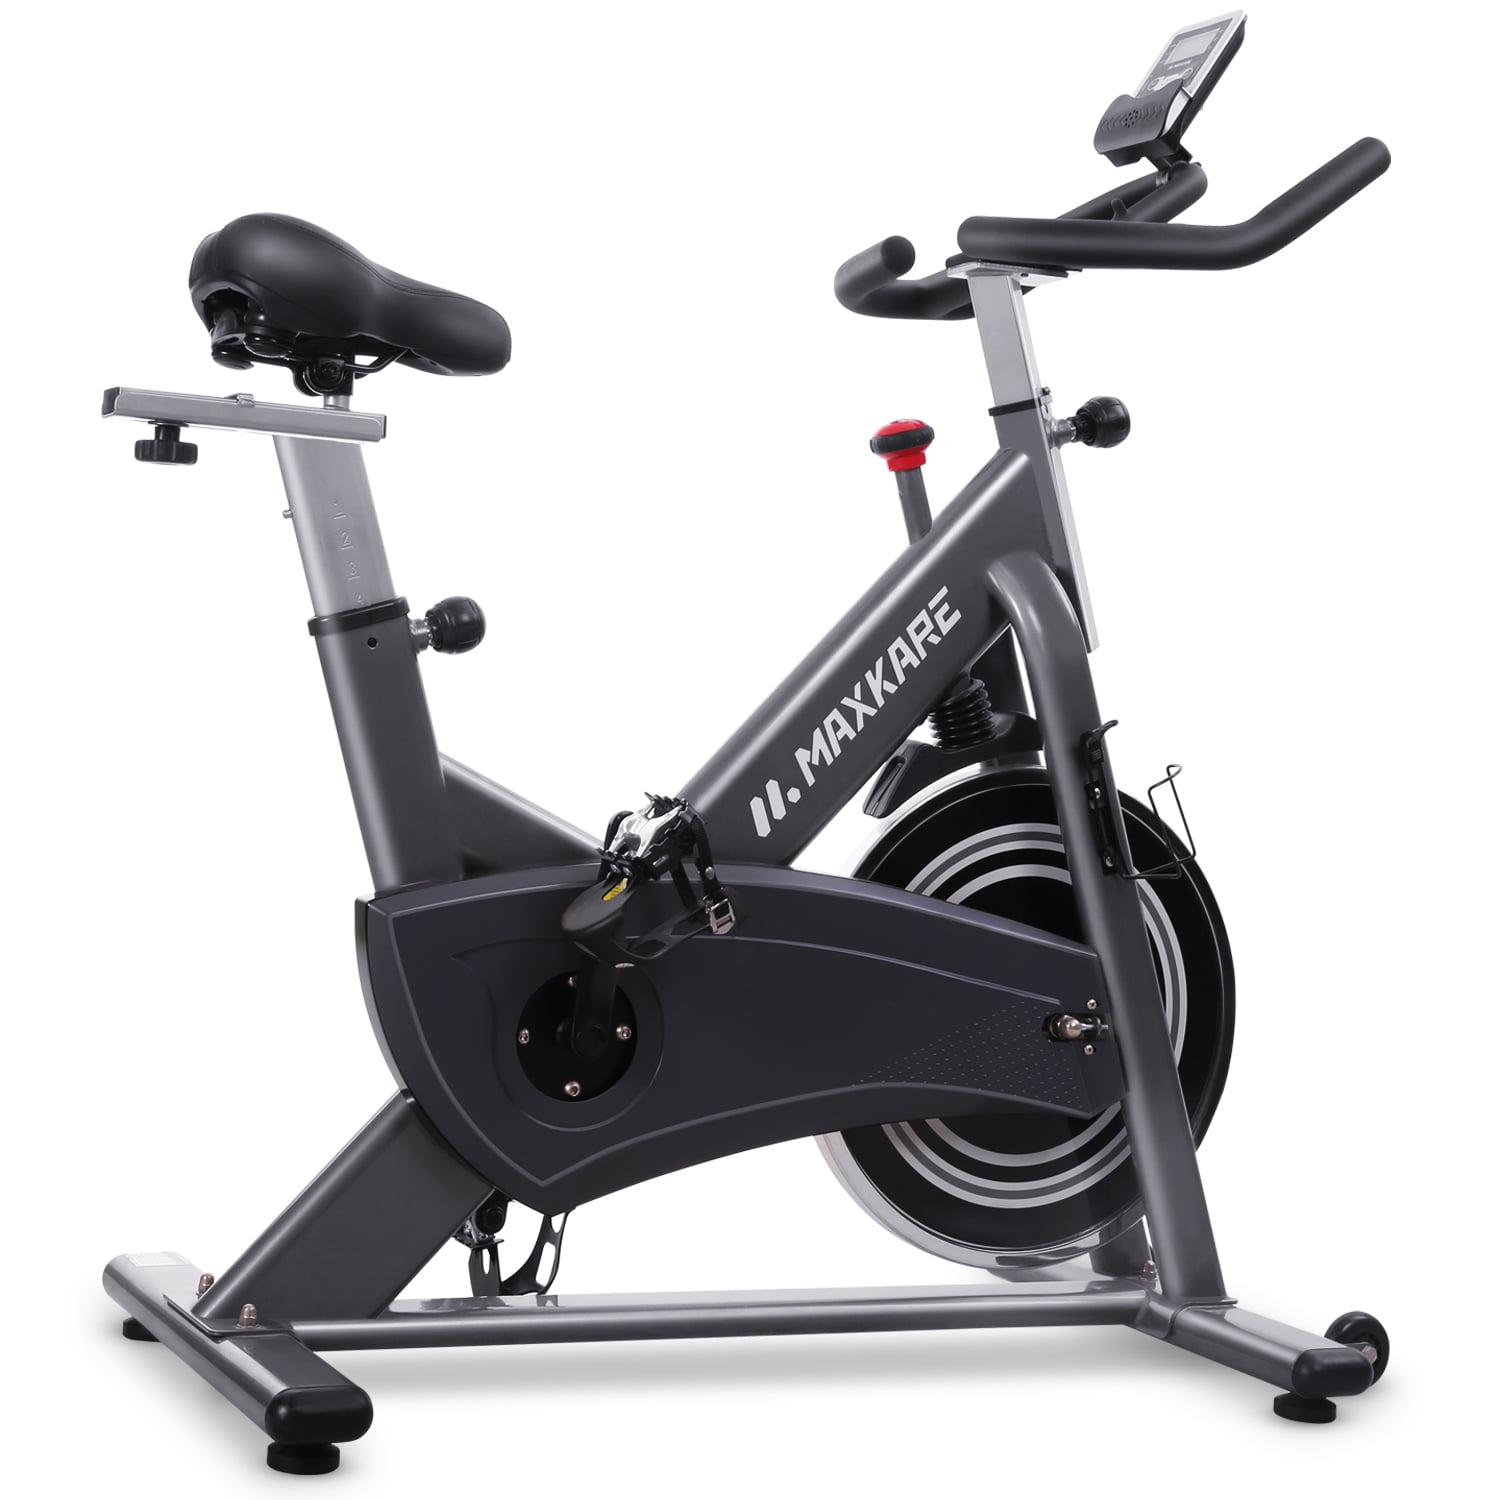 Under Desk Stationary Bike Pedal Exerciser 2 in 1 with LCD Monitor EB-MKD901 